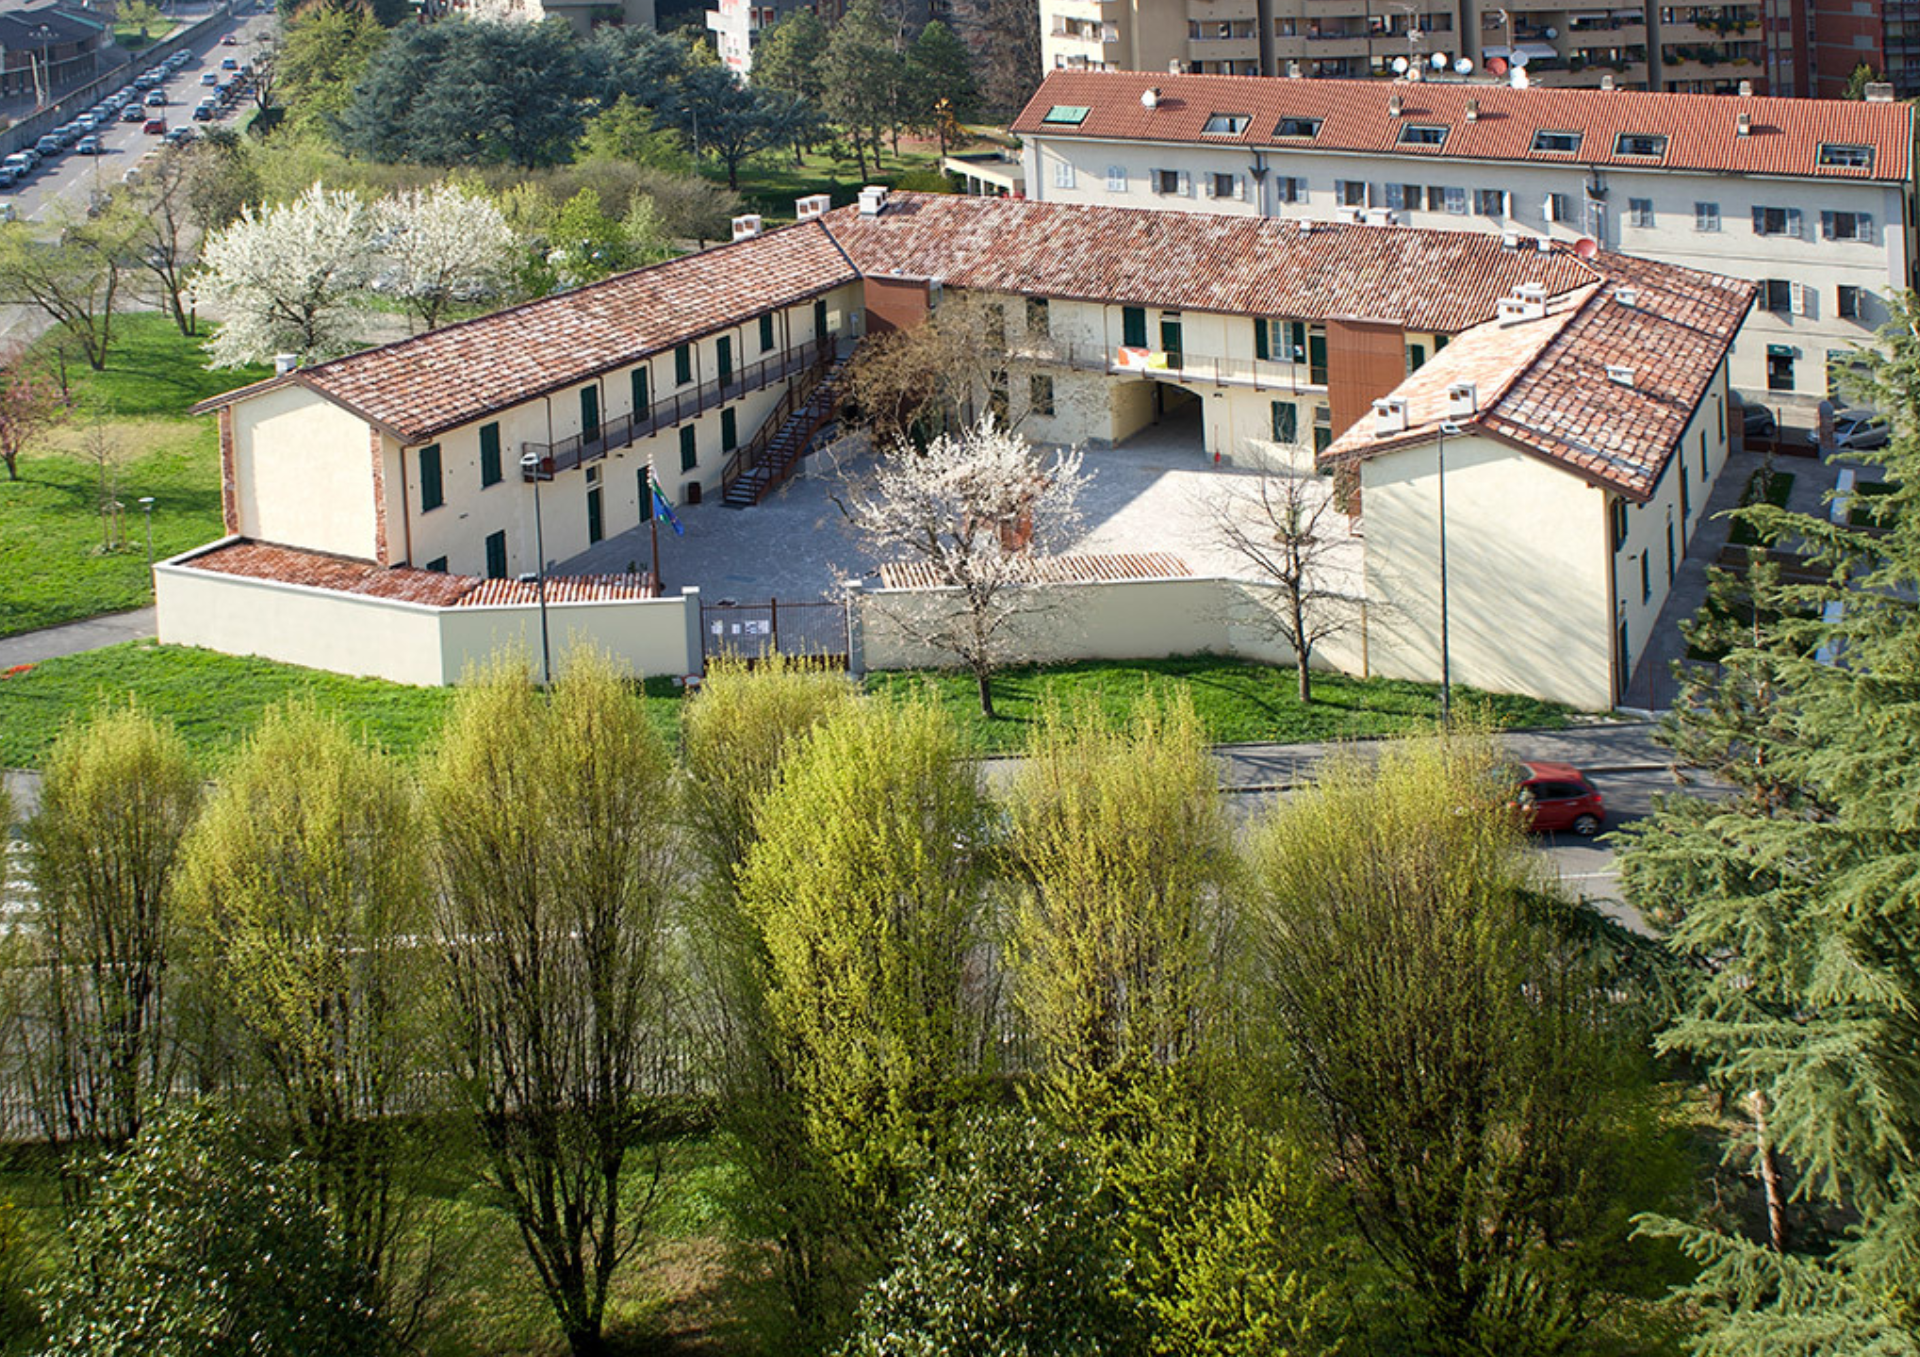 4. Milano, Cascina Cotica, an example of recovery of a rural structure